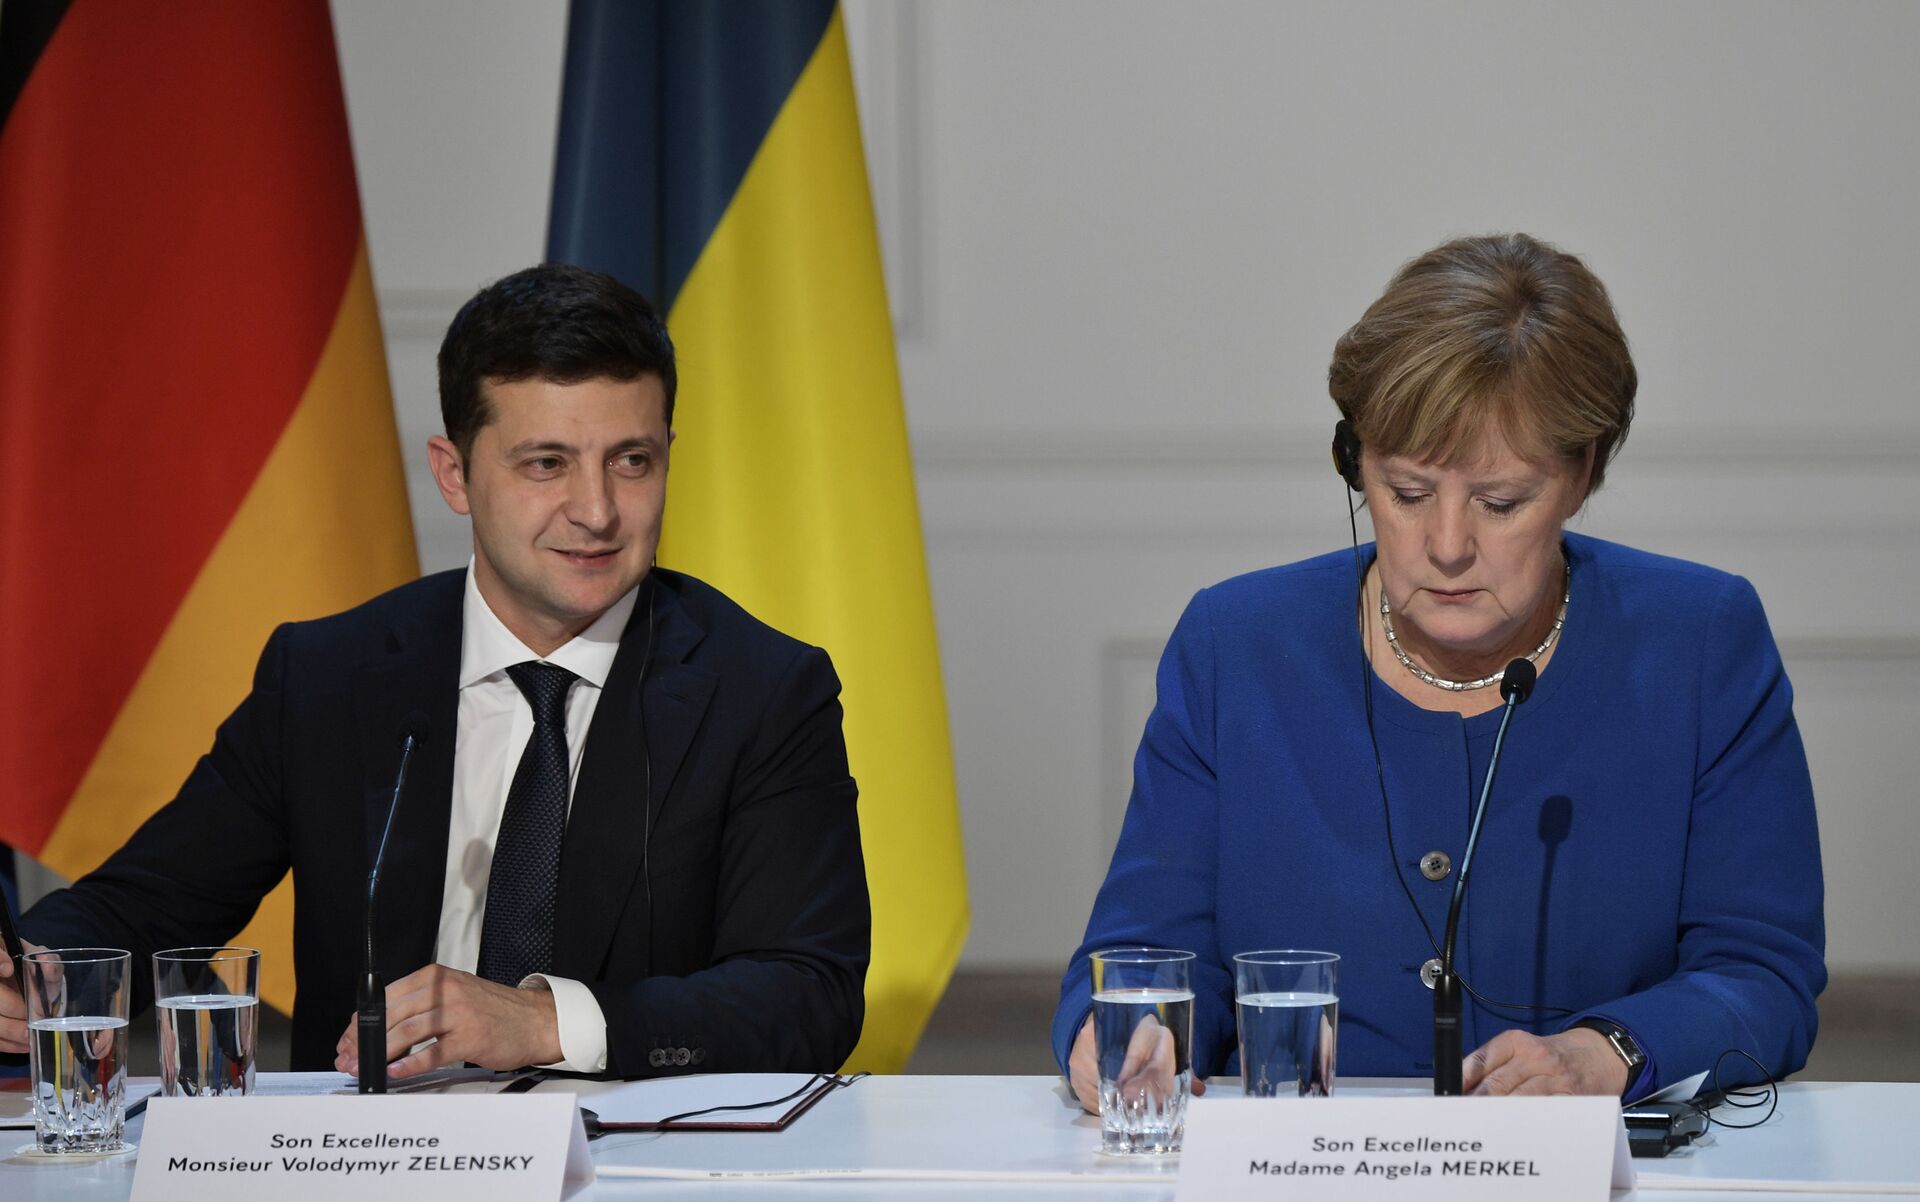 Ukrainian President Volodymyr Zelensky and German Chancellor Angela Merkel attend a joint news conference following a meeting of the Normandy Four leaders at the Elysee Palace in Paris, France. 2019. - Sputnik International, 1920, 07.09.2021